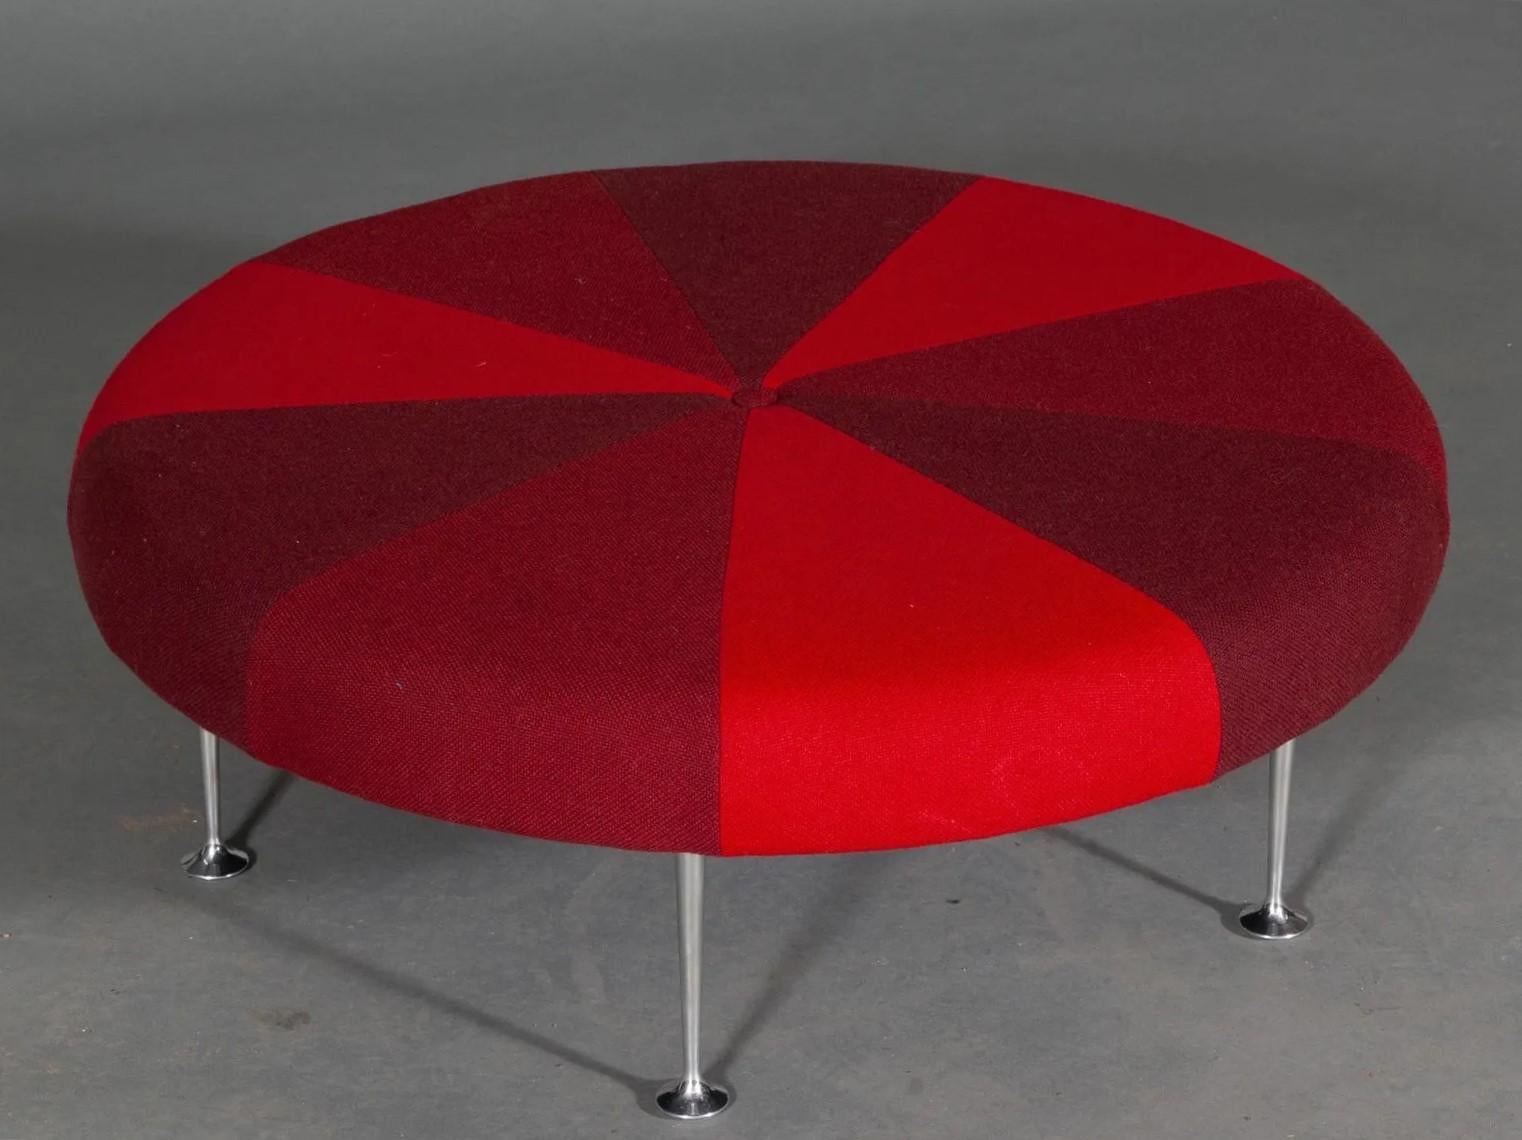 Alexander Girard for Herman Miller Color Wheel. The ottoman is made from a fabric used by the creator called Kvadrat Hallingdal fabric. Legs are polished aluminum. Can be used as a bench or table.